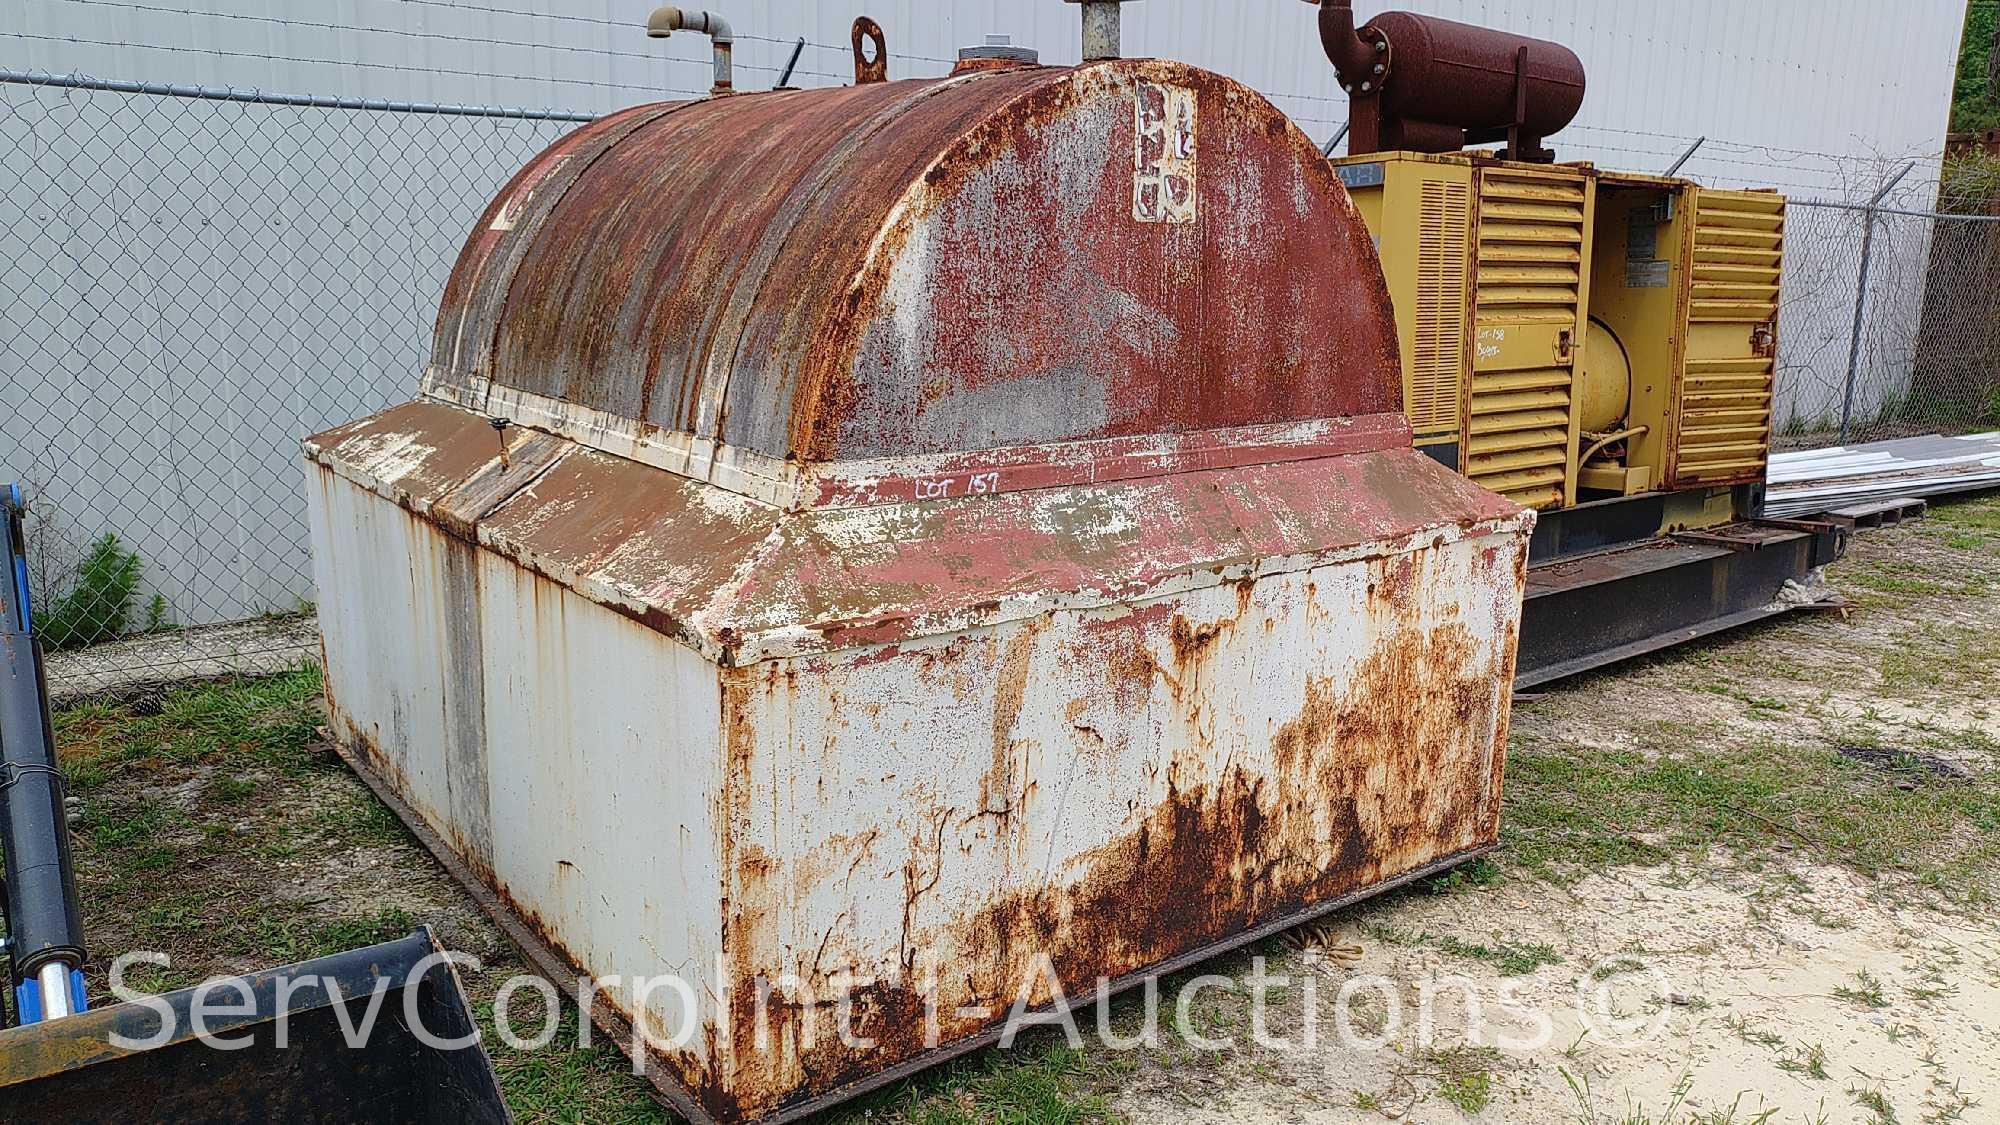 Fuel Tank, Unknown Gallons or Brand, Customer Must Load Themselves (Seller: City of Slidell)